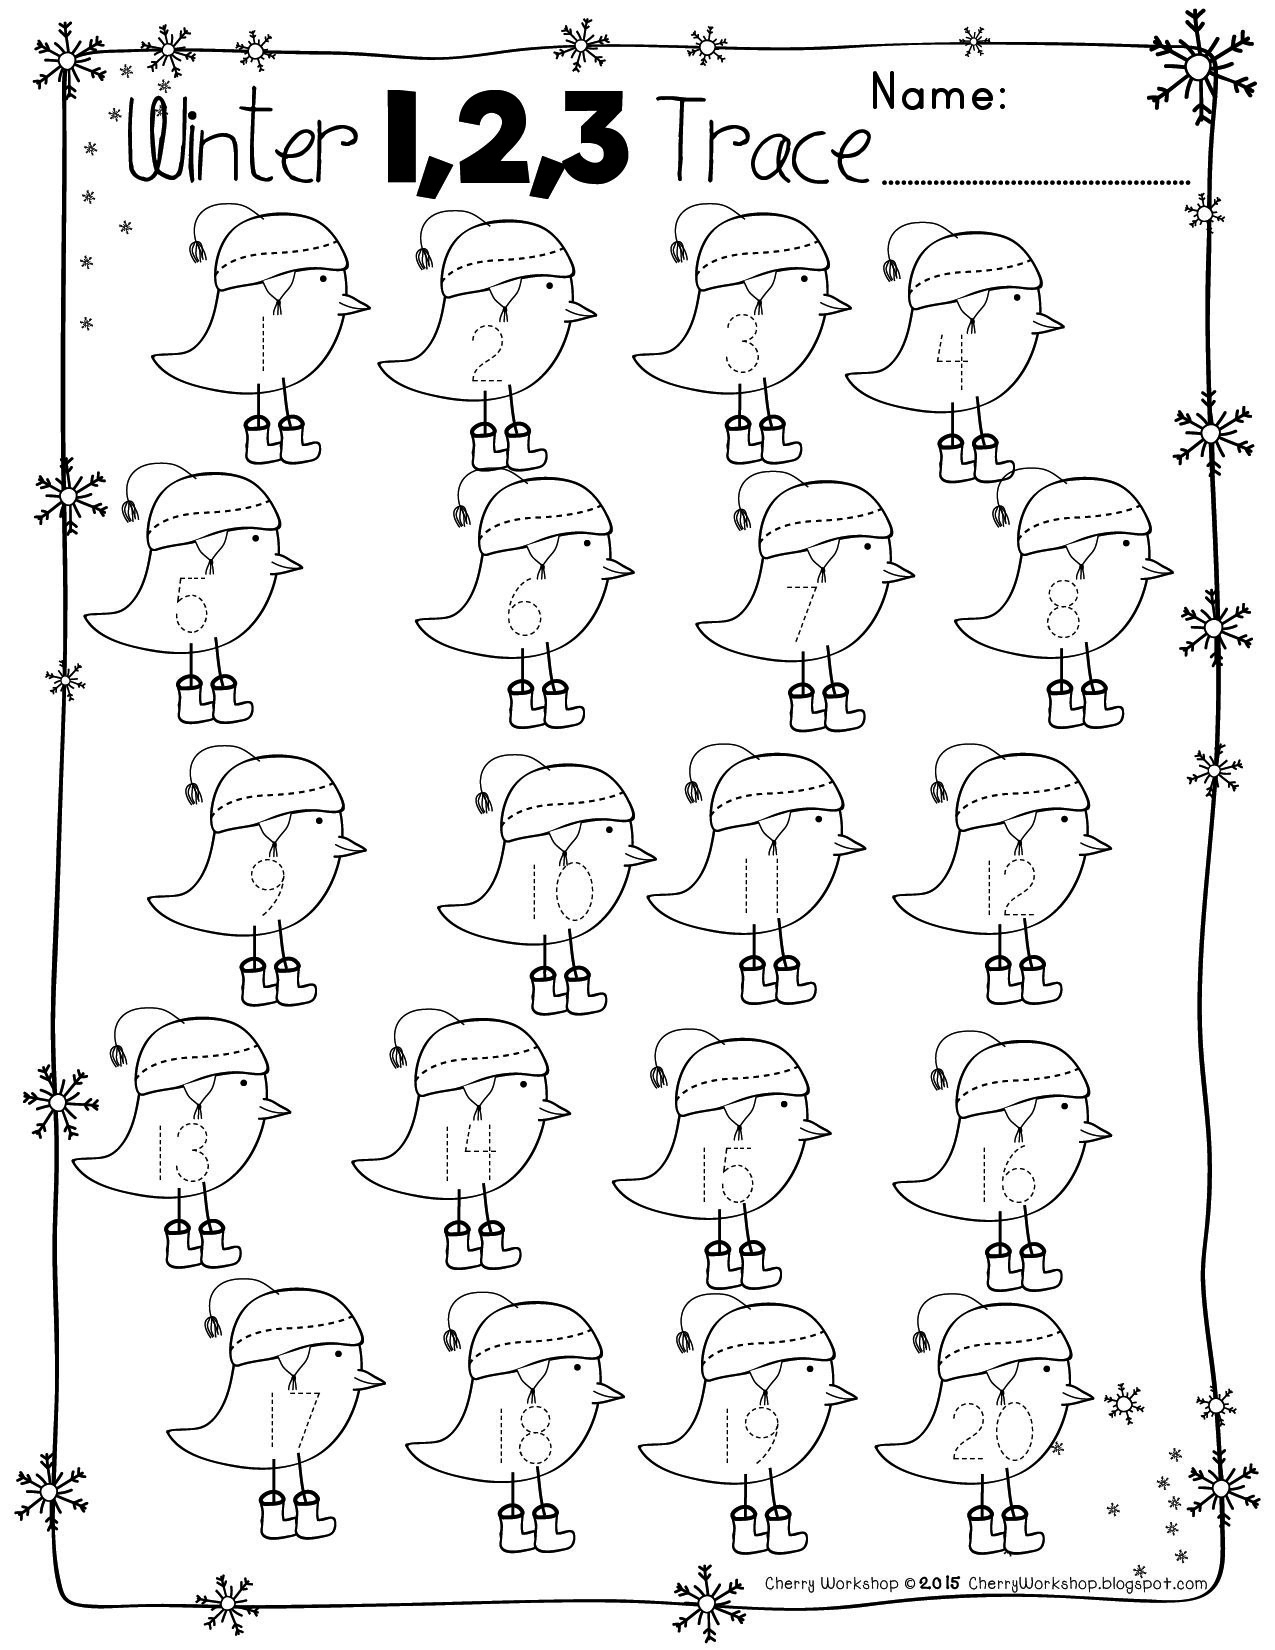 Free Numbers And Abc Winter Tracing Pages | Free Preschool - Free Printable Preschool Name Tracer Pages